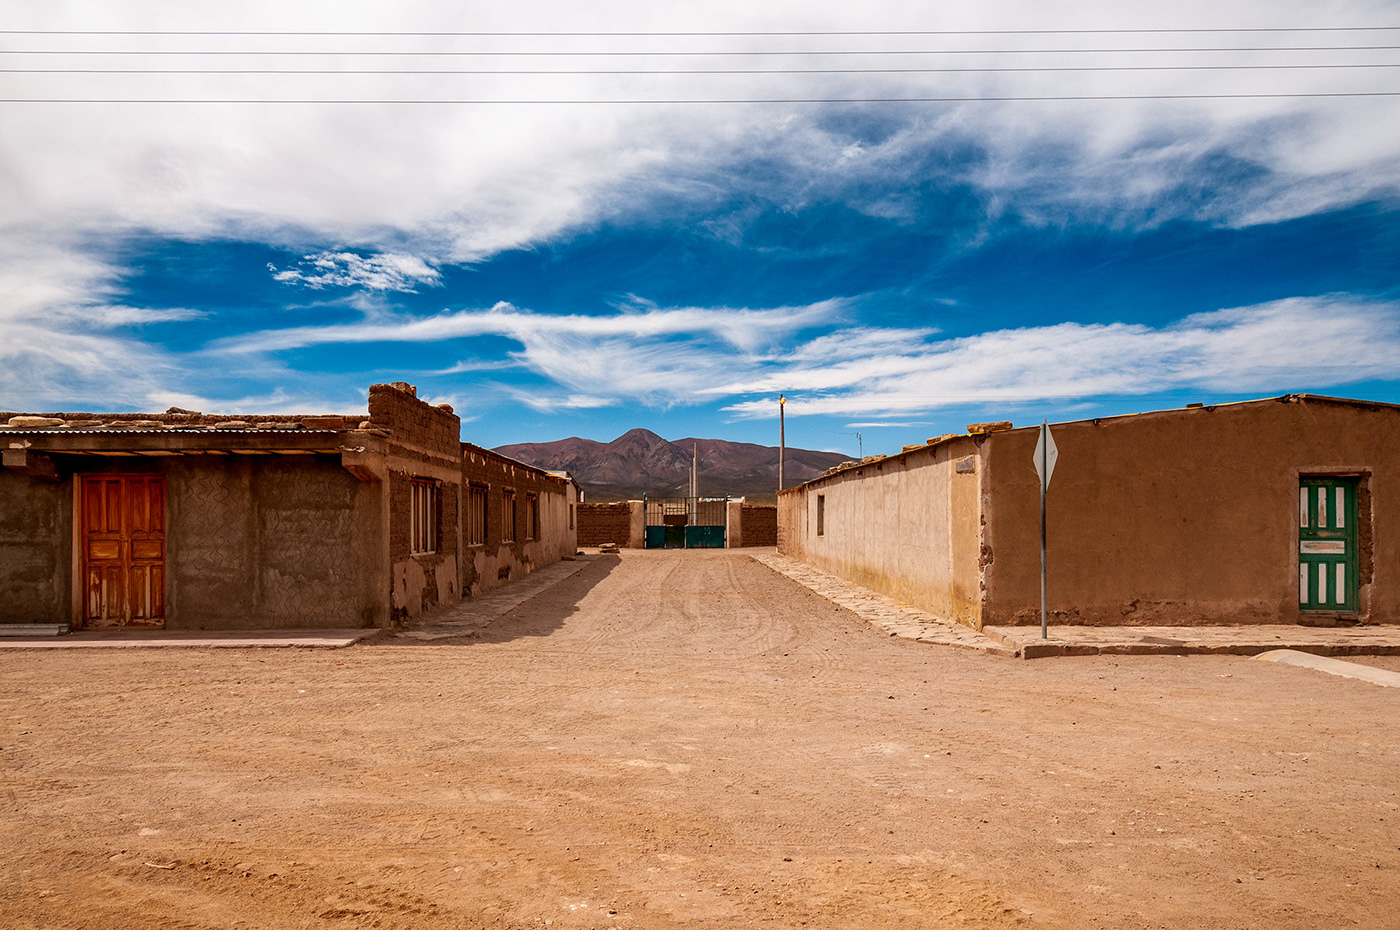 Street photography of a small village in the bolivian altiplano by photographer Jennifer Esseiva.